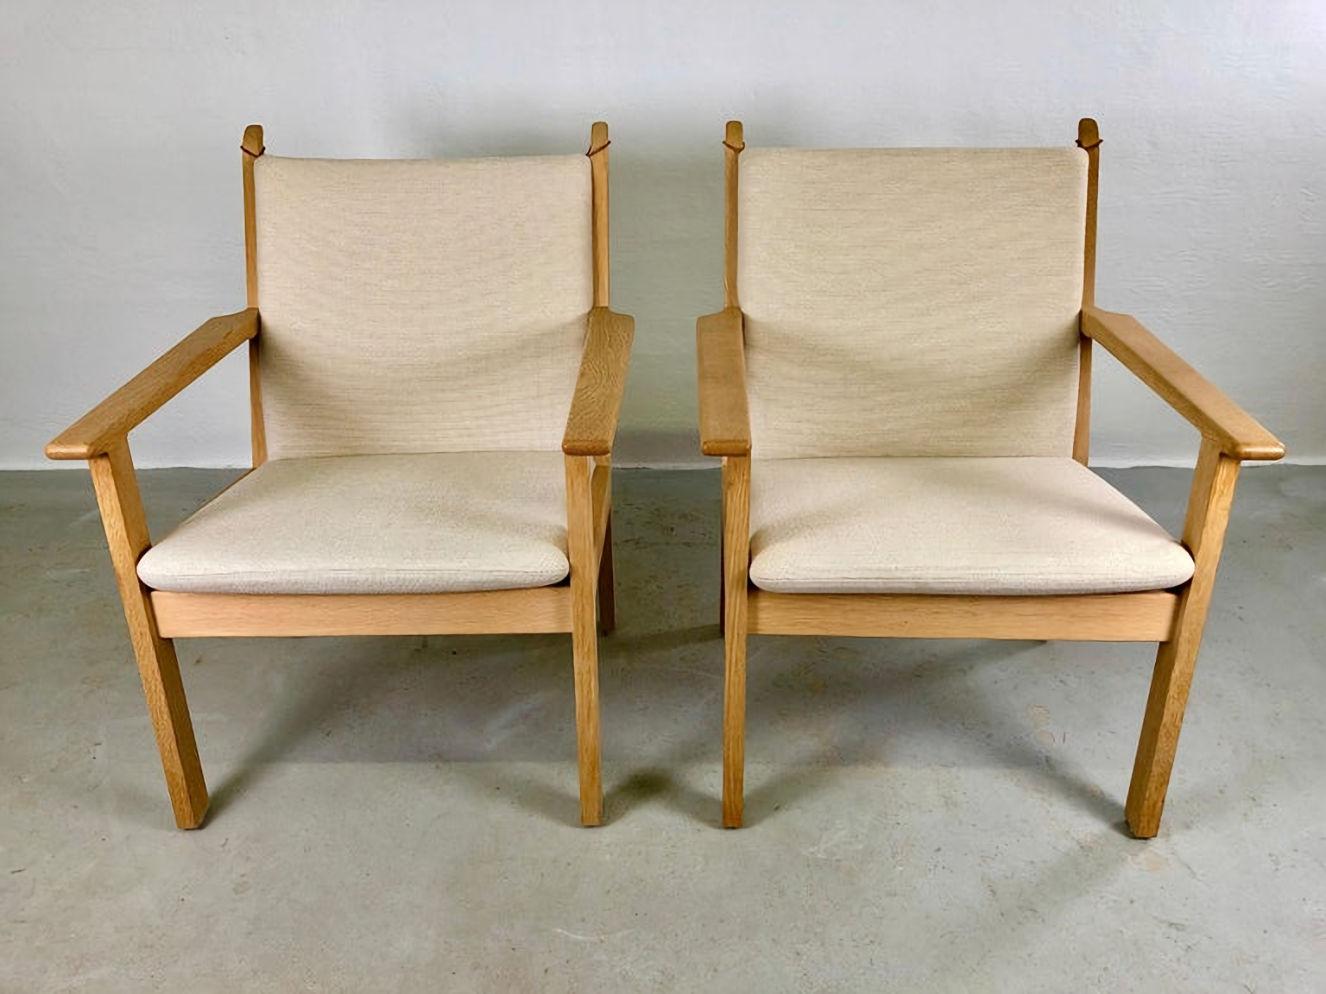 Danish Hans J. Wegner set of two lounge chairs in oak and fabric by GETAMA

The comfortable model GE-284 lounge chair was designed by Hans J. Wegner in 1984 with it´s simple but elegant Wegner design feature a strong oak frame with small and simple